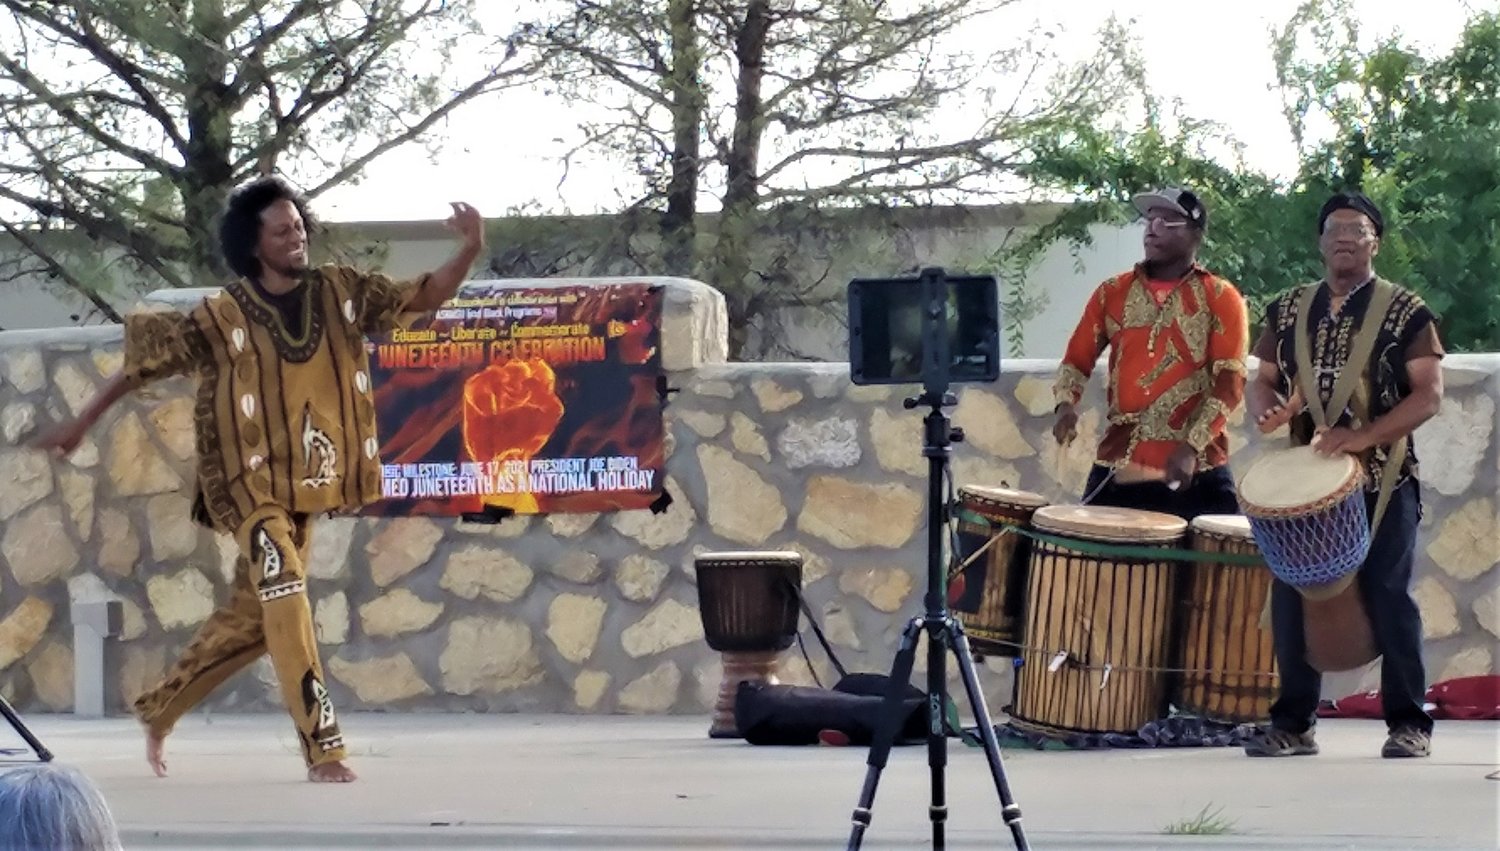 Members of the Wontanara of Santa Fe perform during the Juneteenth celebration held June 17 at Corbett Center on the NMSU campus.